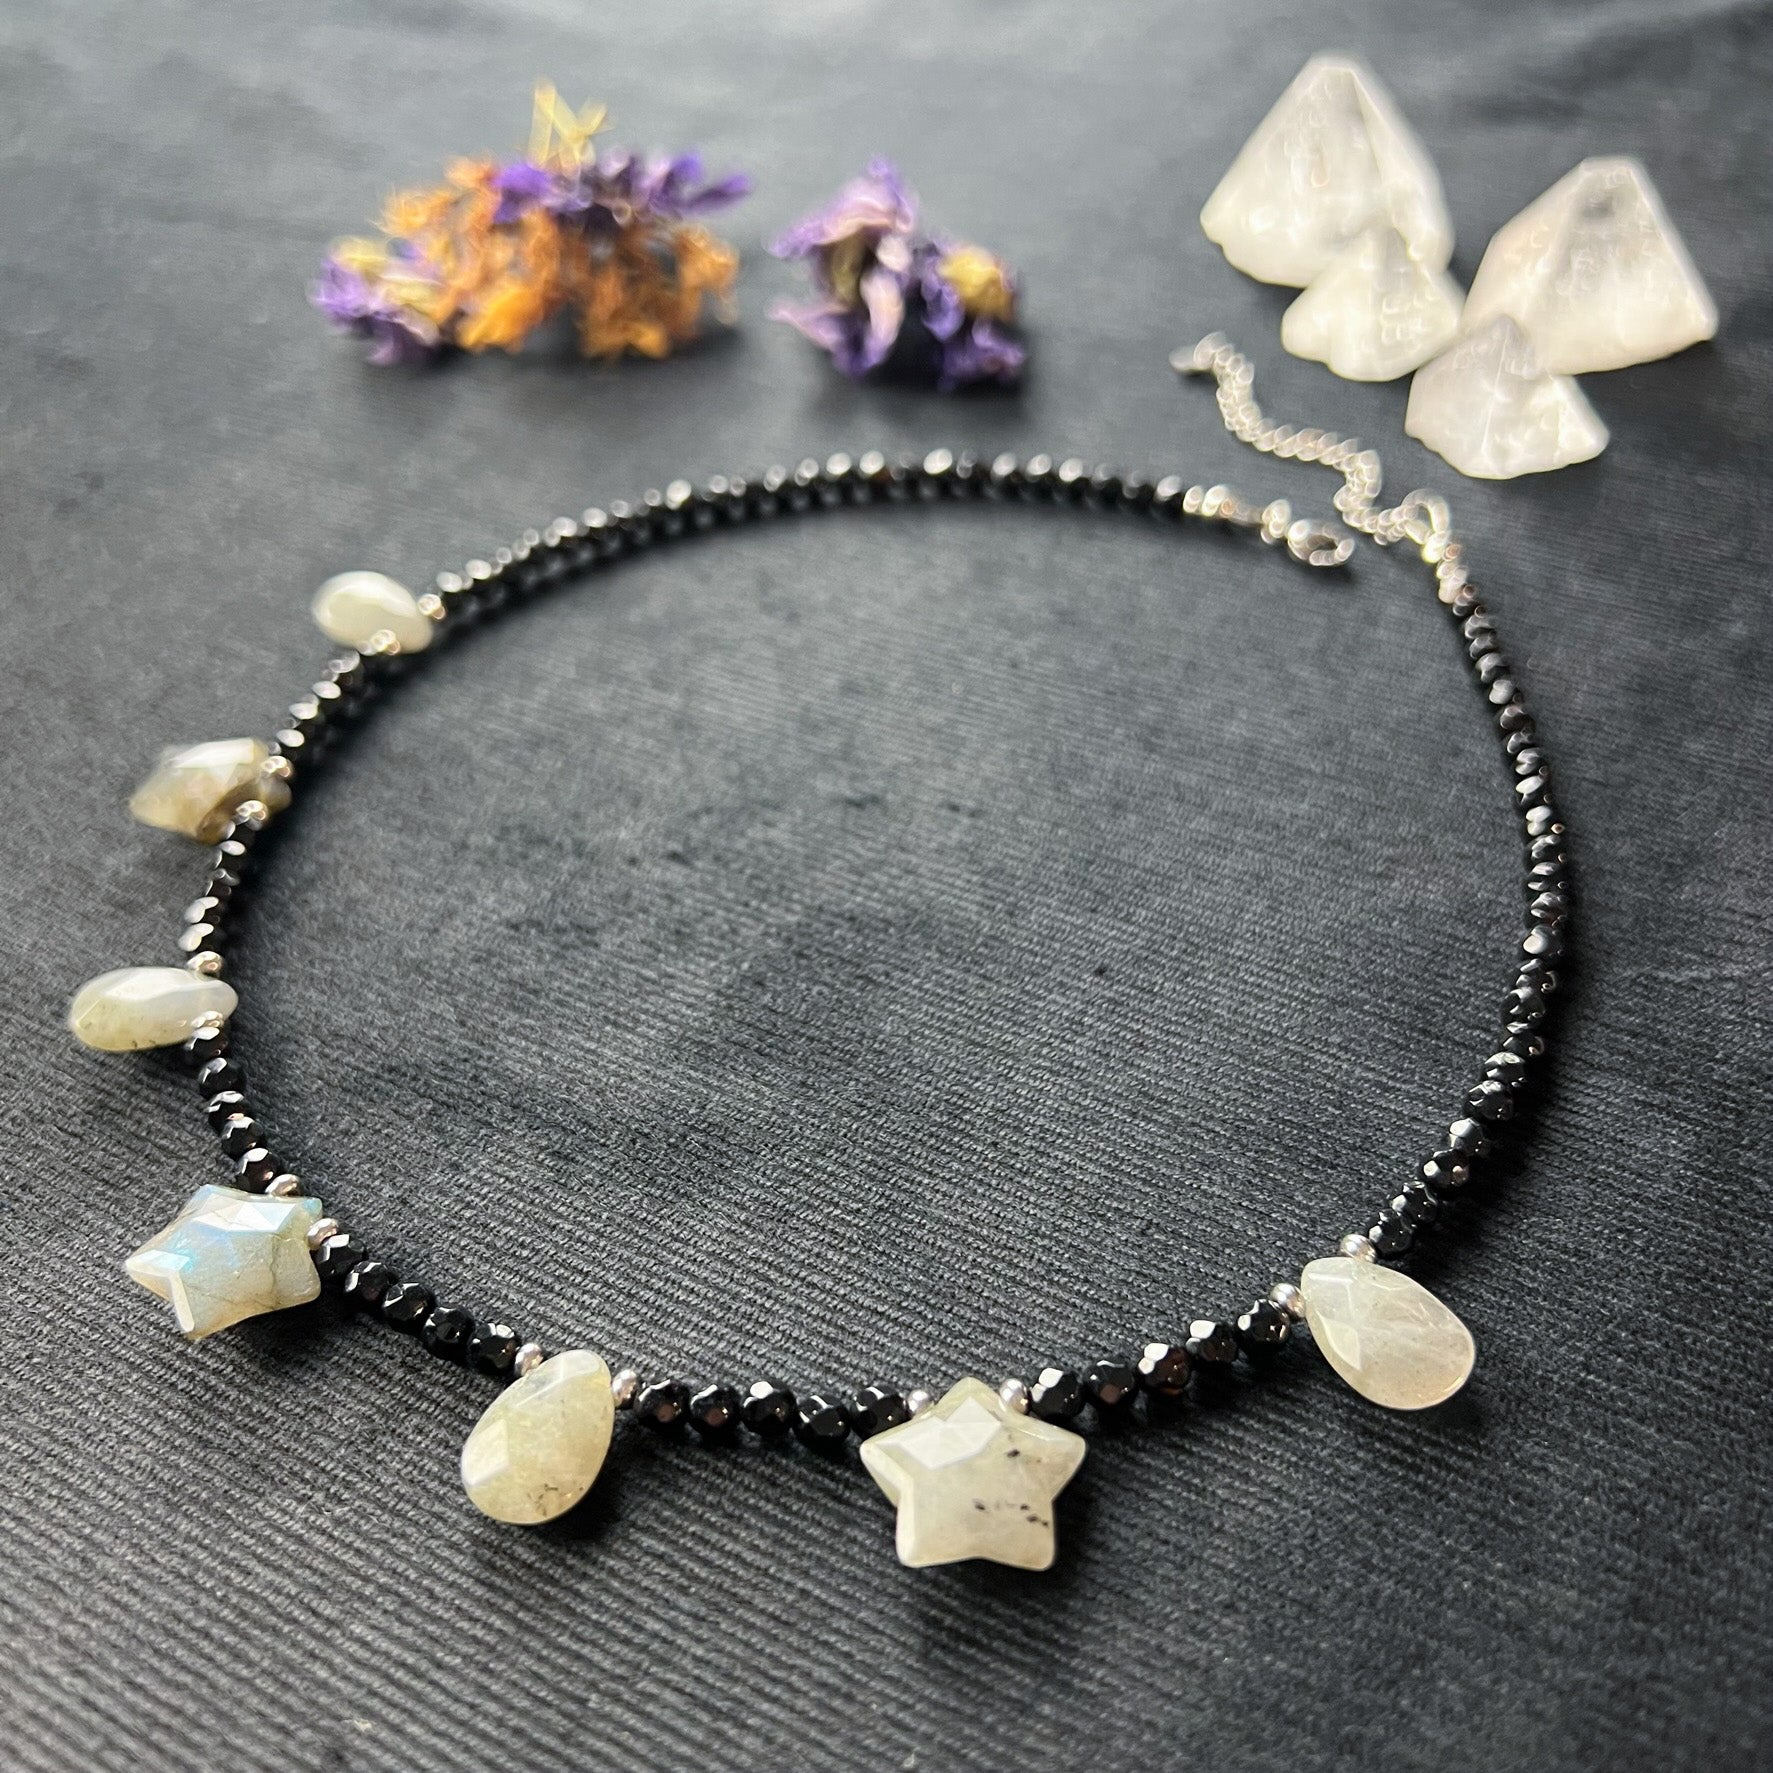 Gemstone beaded necklace stars and teardrops labradorite onyx and stainless steel Rêveries Collection gothic fairy gift for her